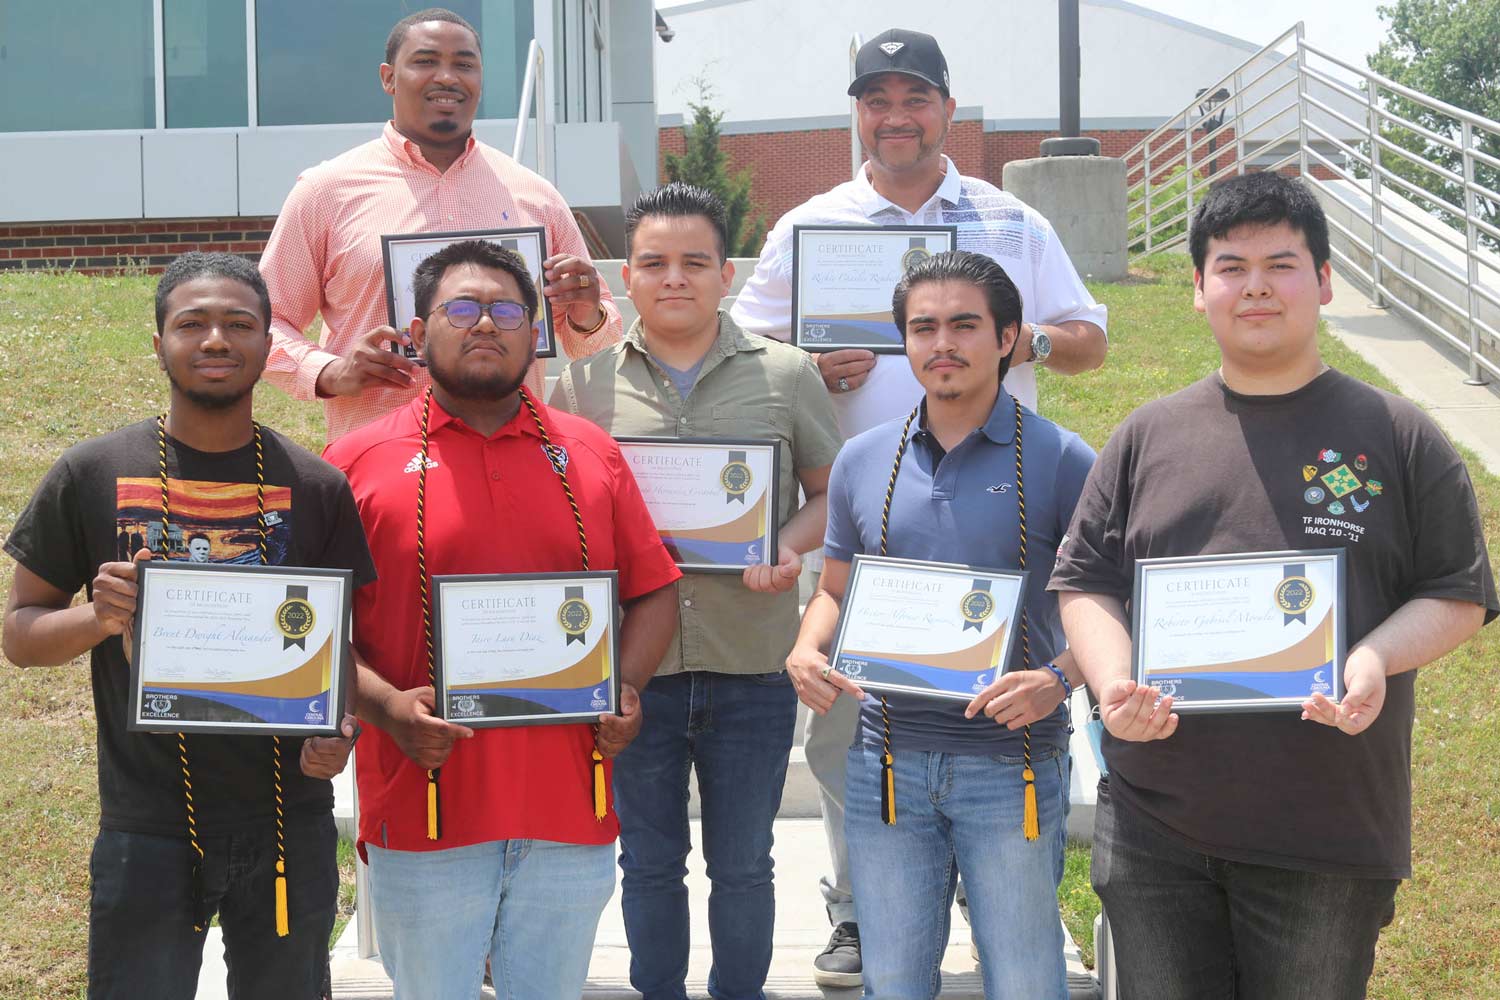 Click to enlarge,  Central Carolina Community College Brothers of Excellence award recipients include, left to right: first row, Brent Alexander, Jairo Diaz, Leo Hernandez Cristobal, Hector Ramirez, and Roberto Morales; second row, Kenneth Caraway and Rickie Rembert. 